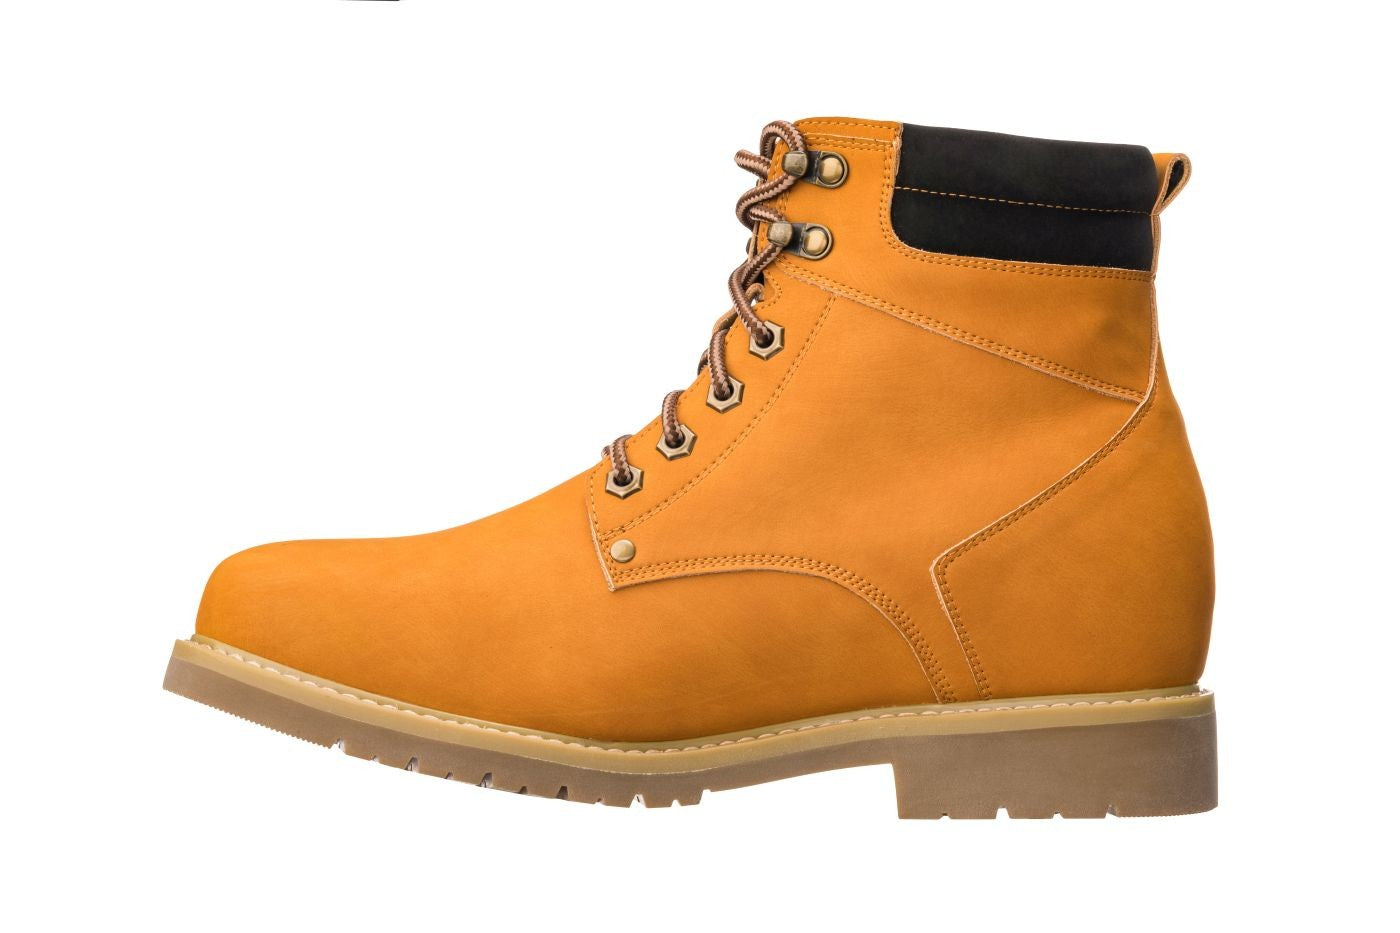 Elevator shoes height increase CALTO - K8821 - 3.2 Inches Taller (Nubuck Camel) - Work Style Boot